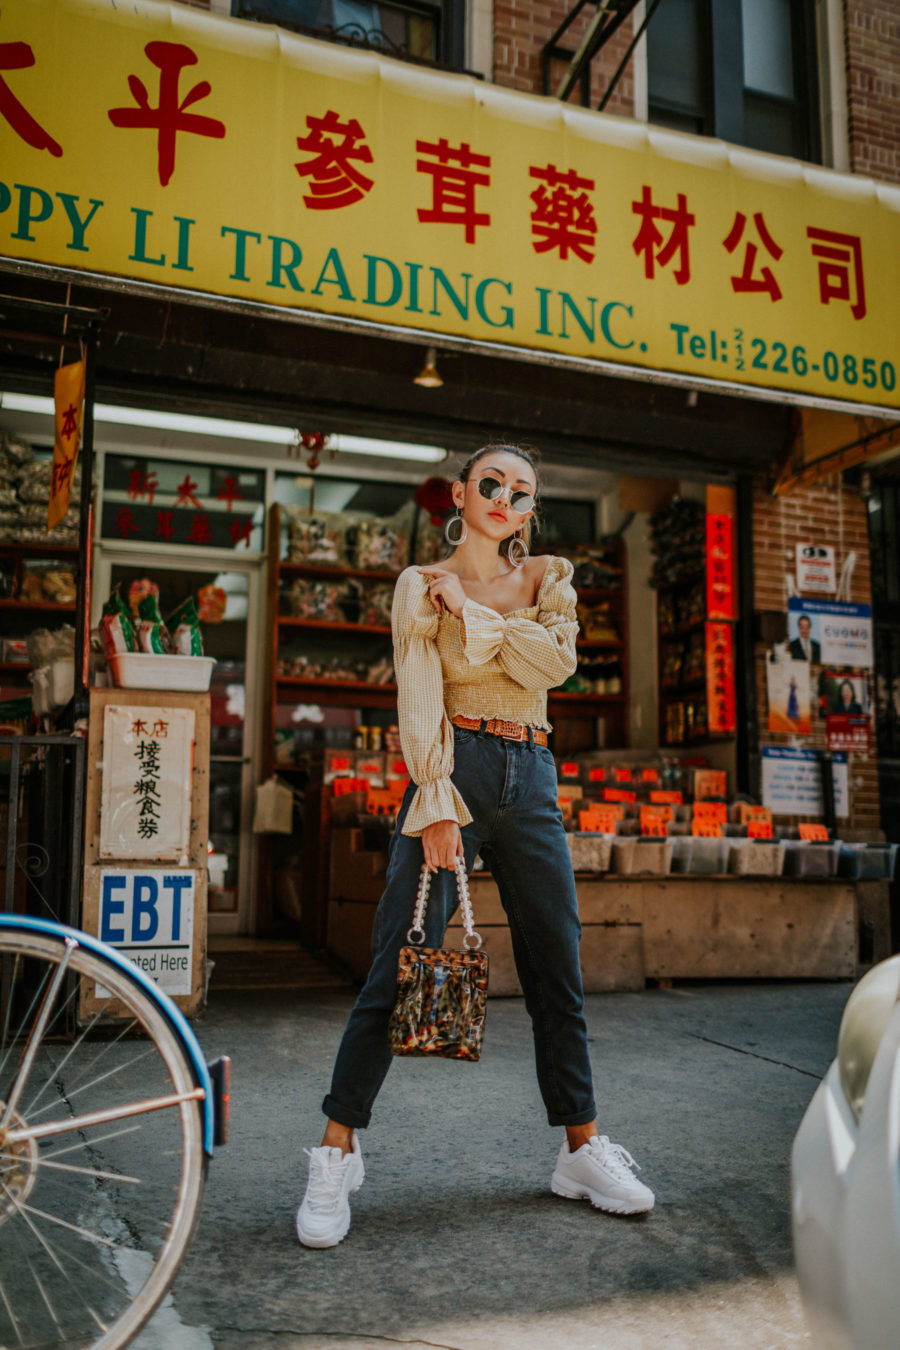 Shop your favorite fall trends with Afterpay at Urban Outfitters- BDG Mom Jeans, smocked top, western belt, hexagonal sunglasses, NYC fashion blogger // Notjessfashion.com